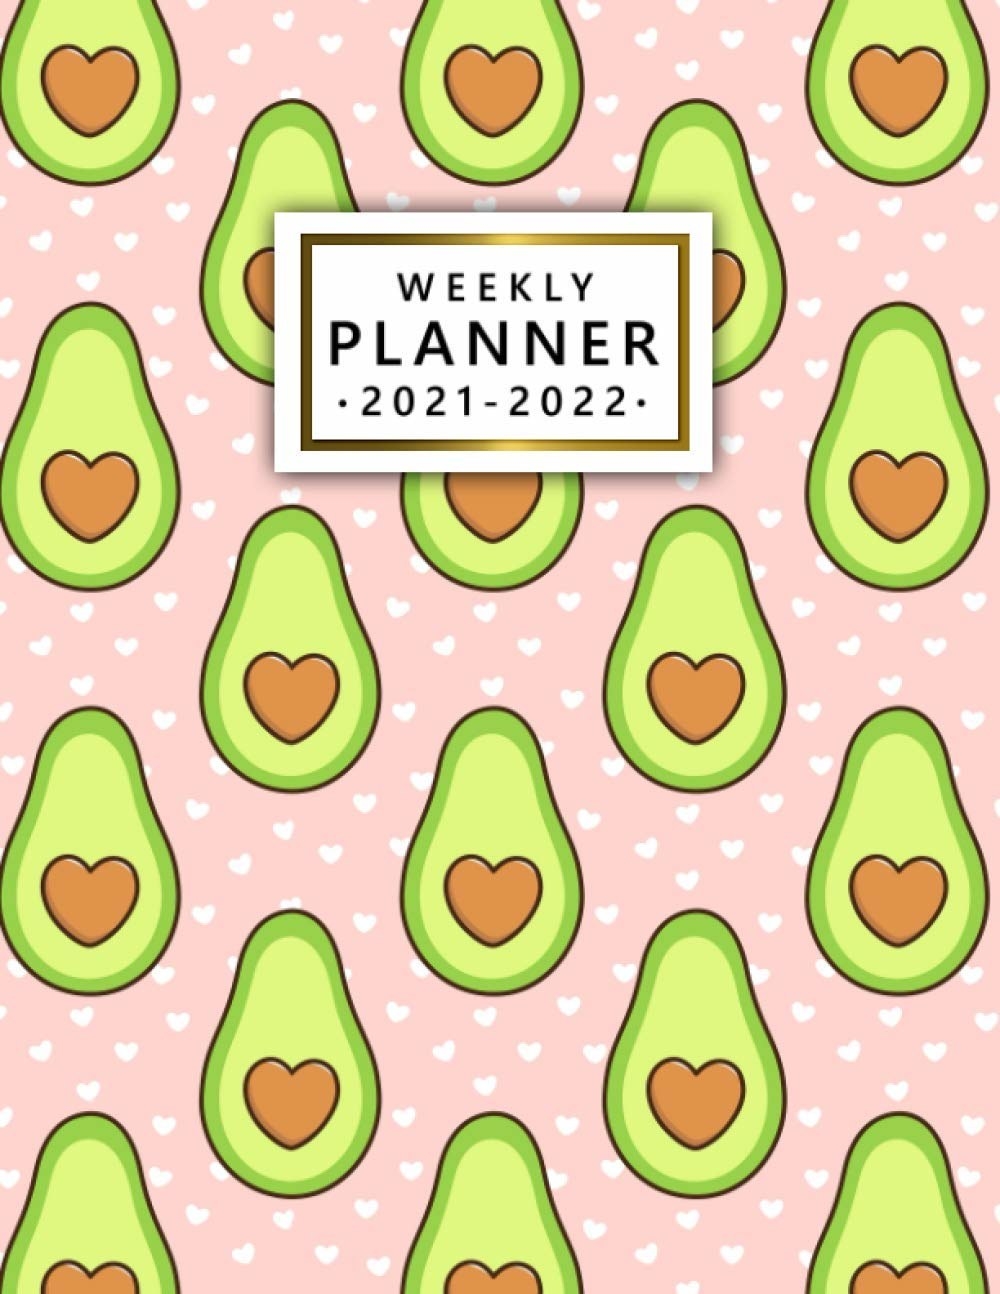 A planner with illustrations of avocados on the cover